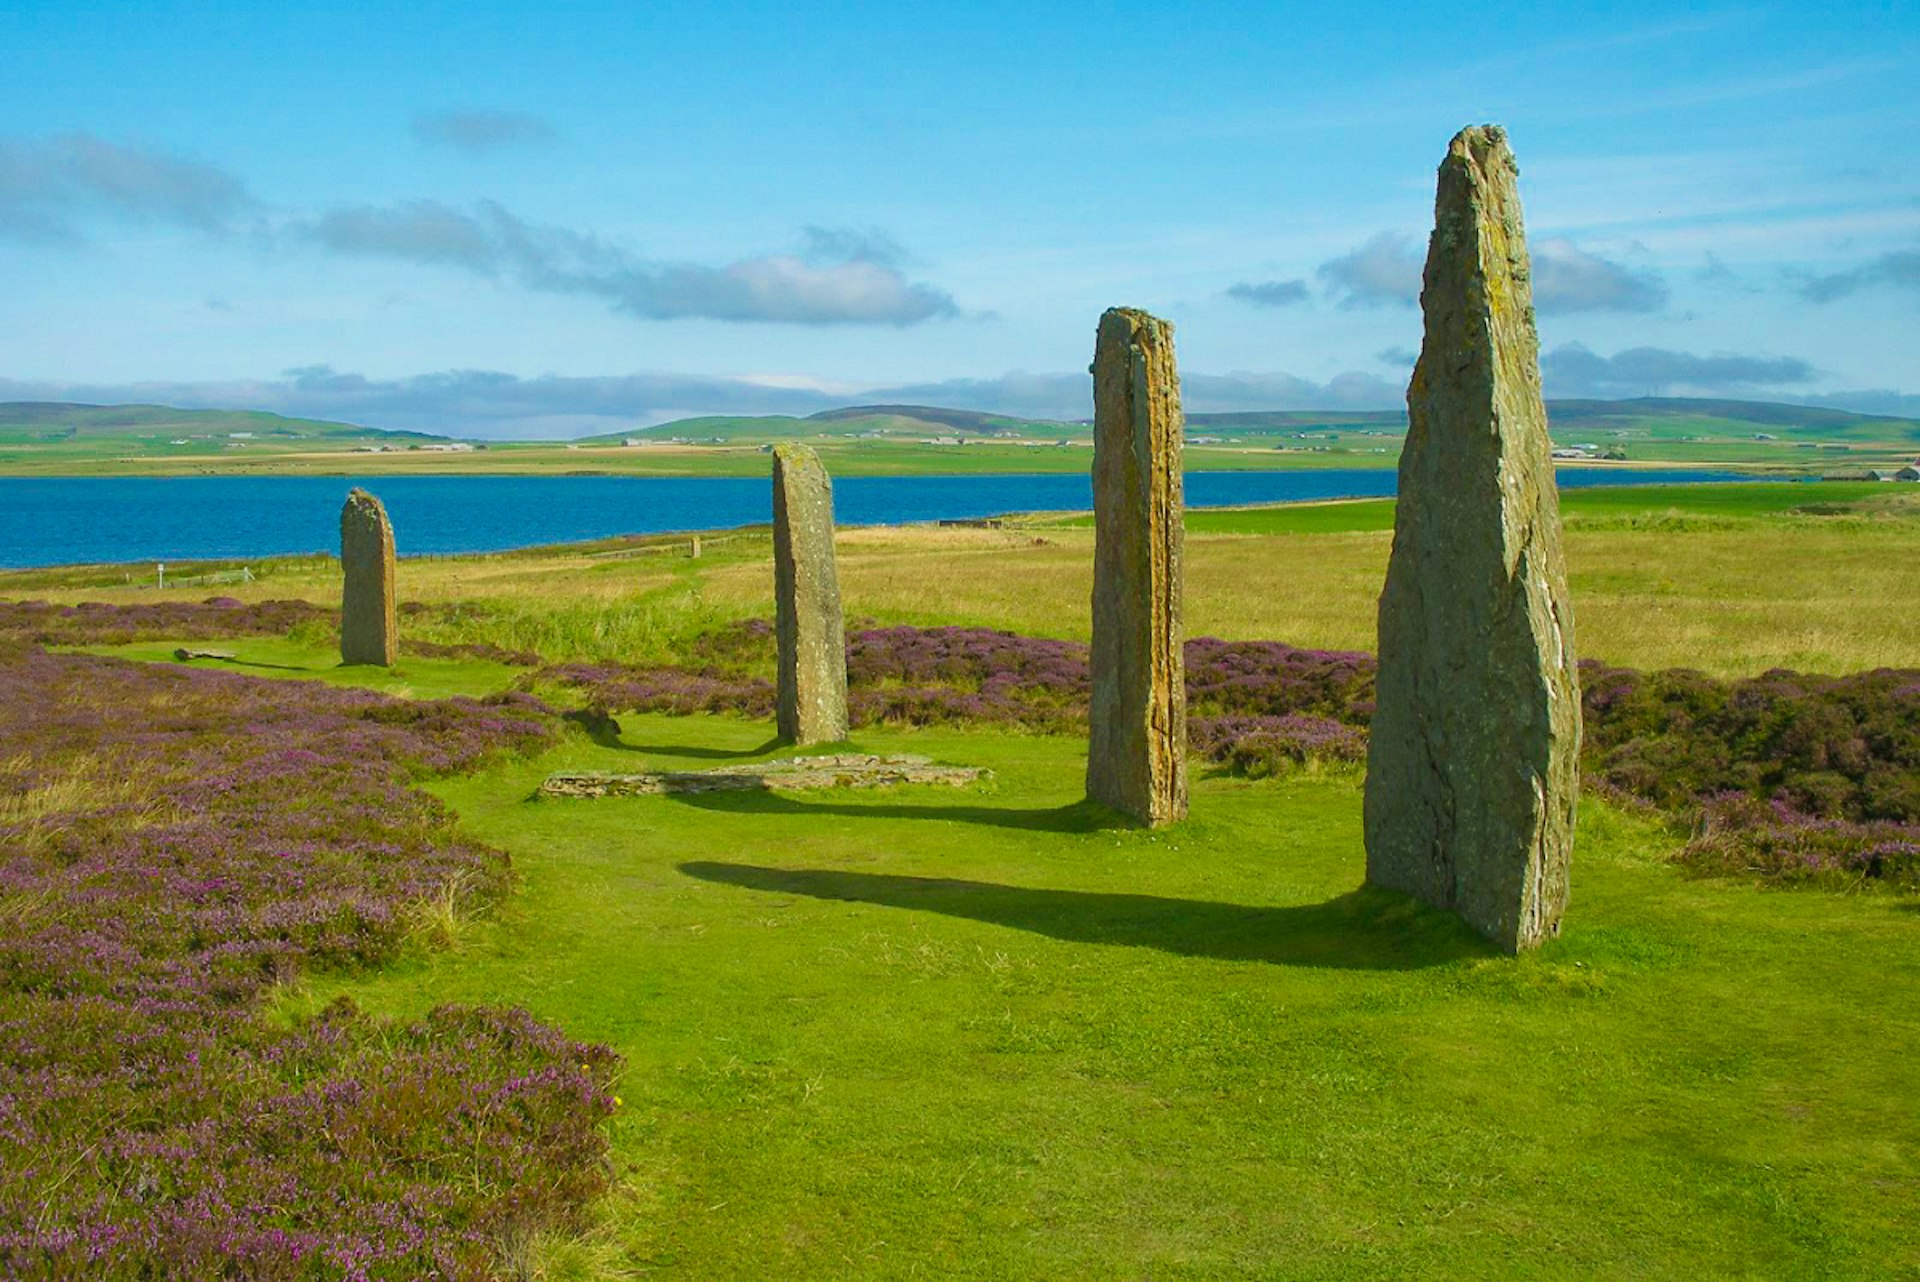 Orkney boasts wildlife and prehistoric remains including the Ring of Brodgar. Image by Shadowgate / CC BY 2.0